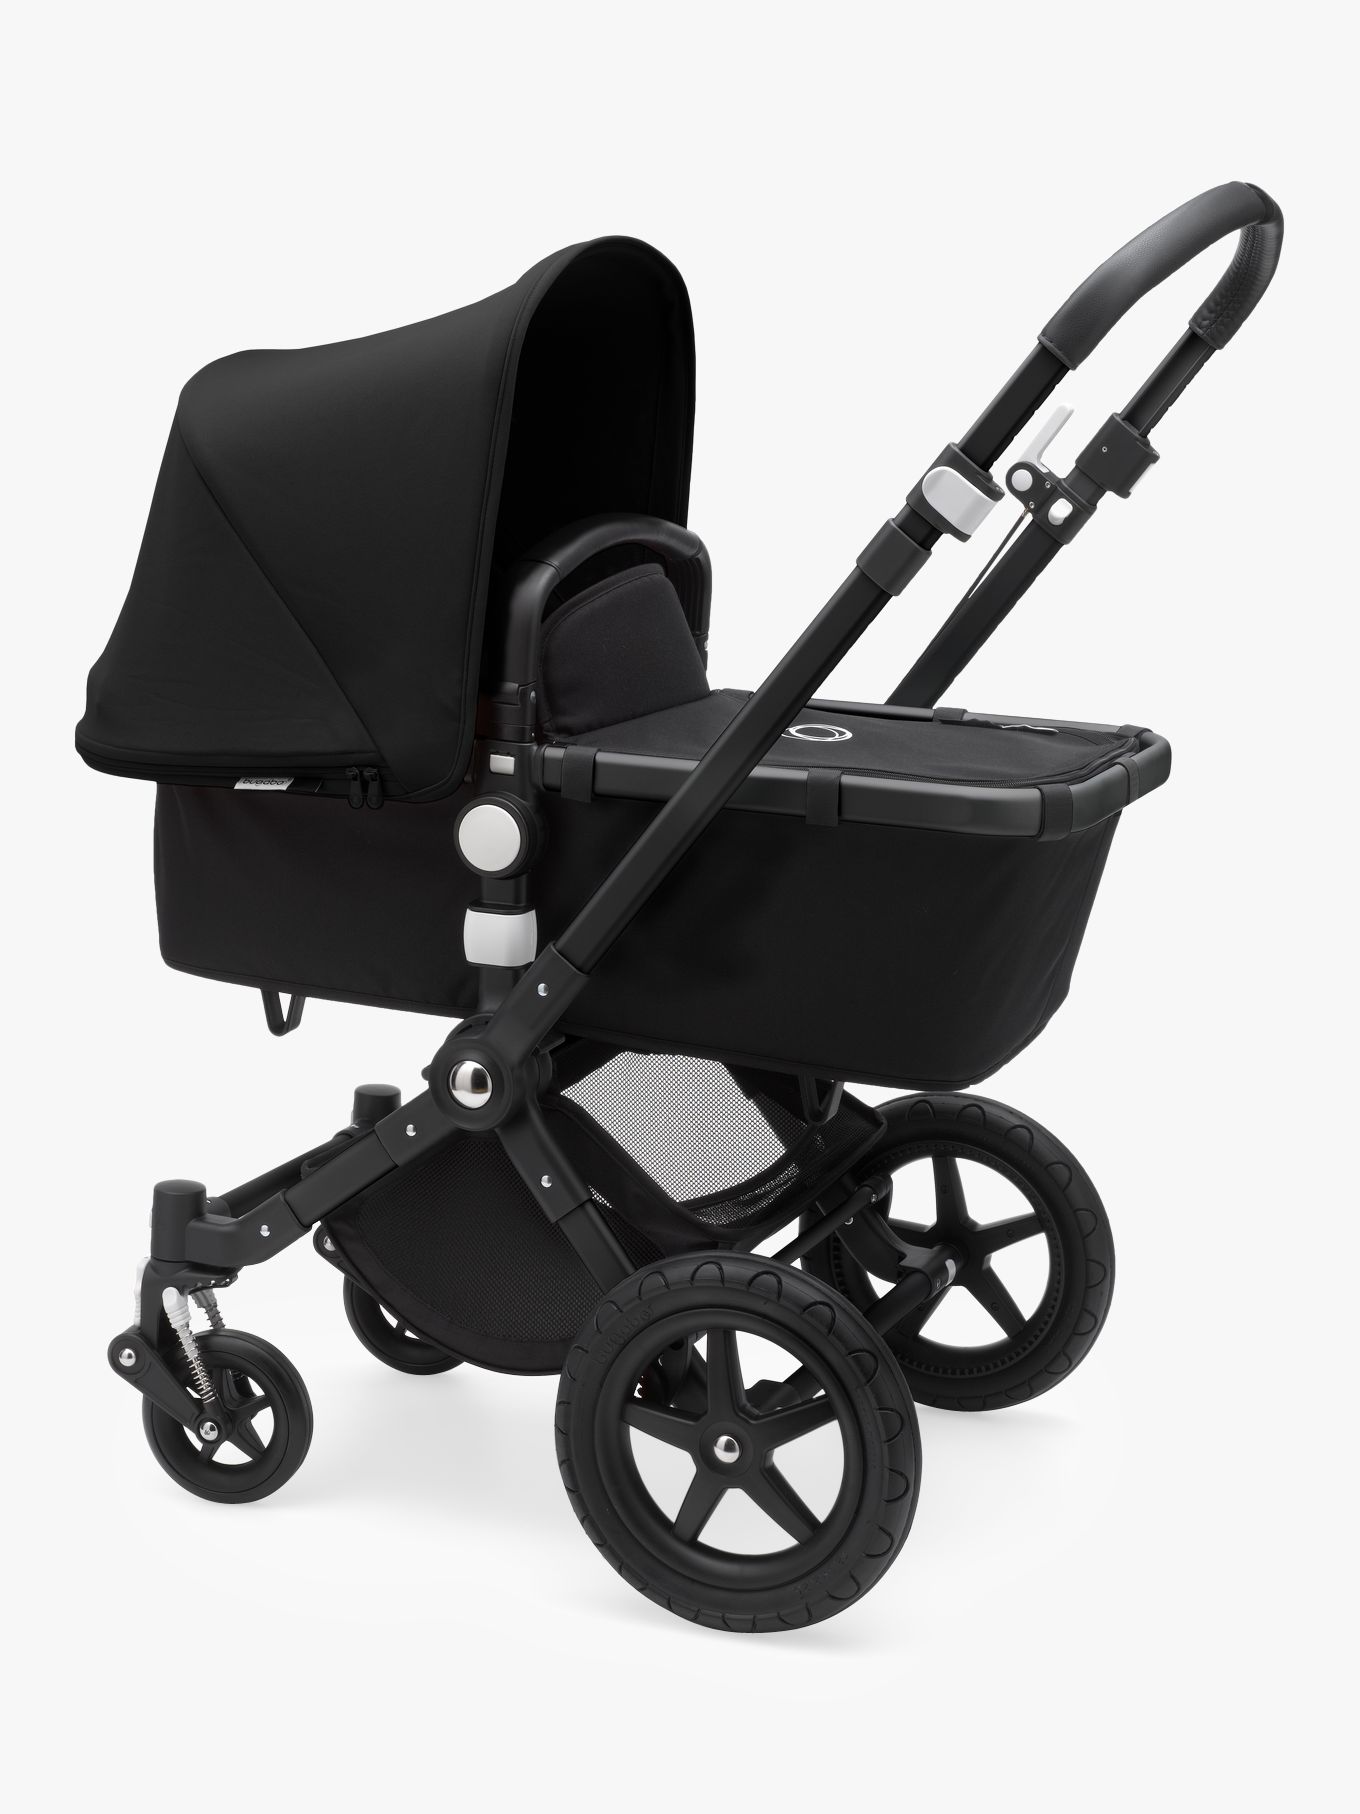 what's the best stroller on the market